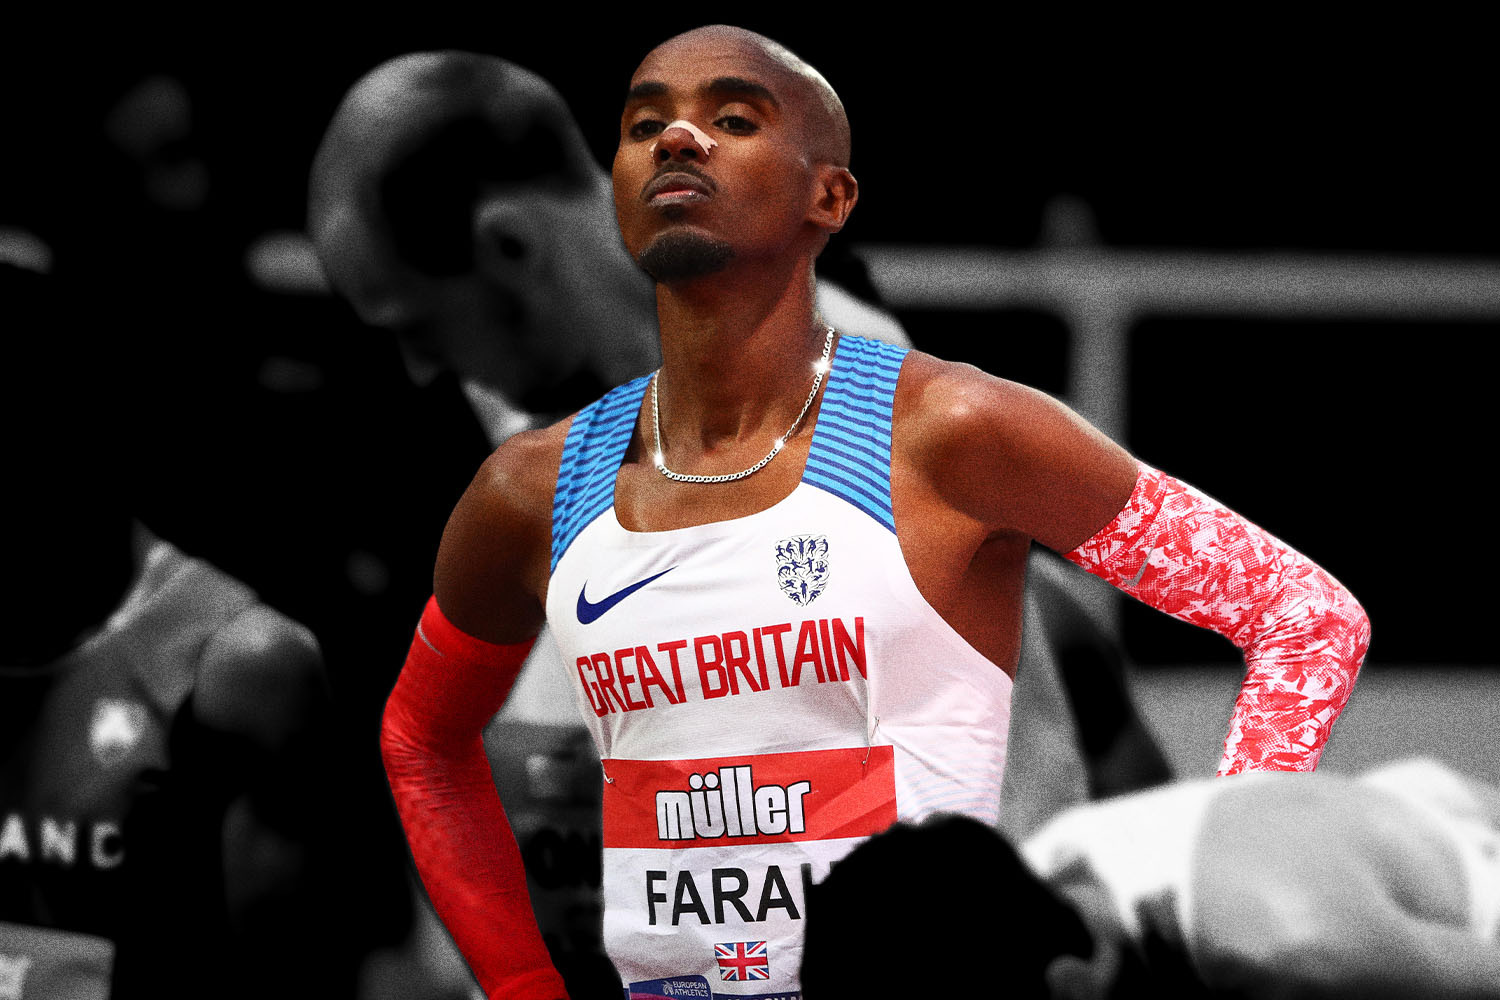 Mo Farah on the starting line wearing a chain.